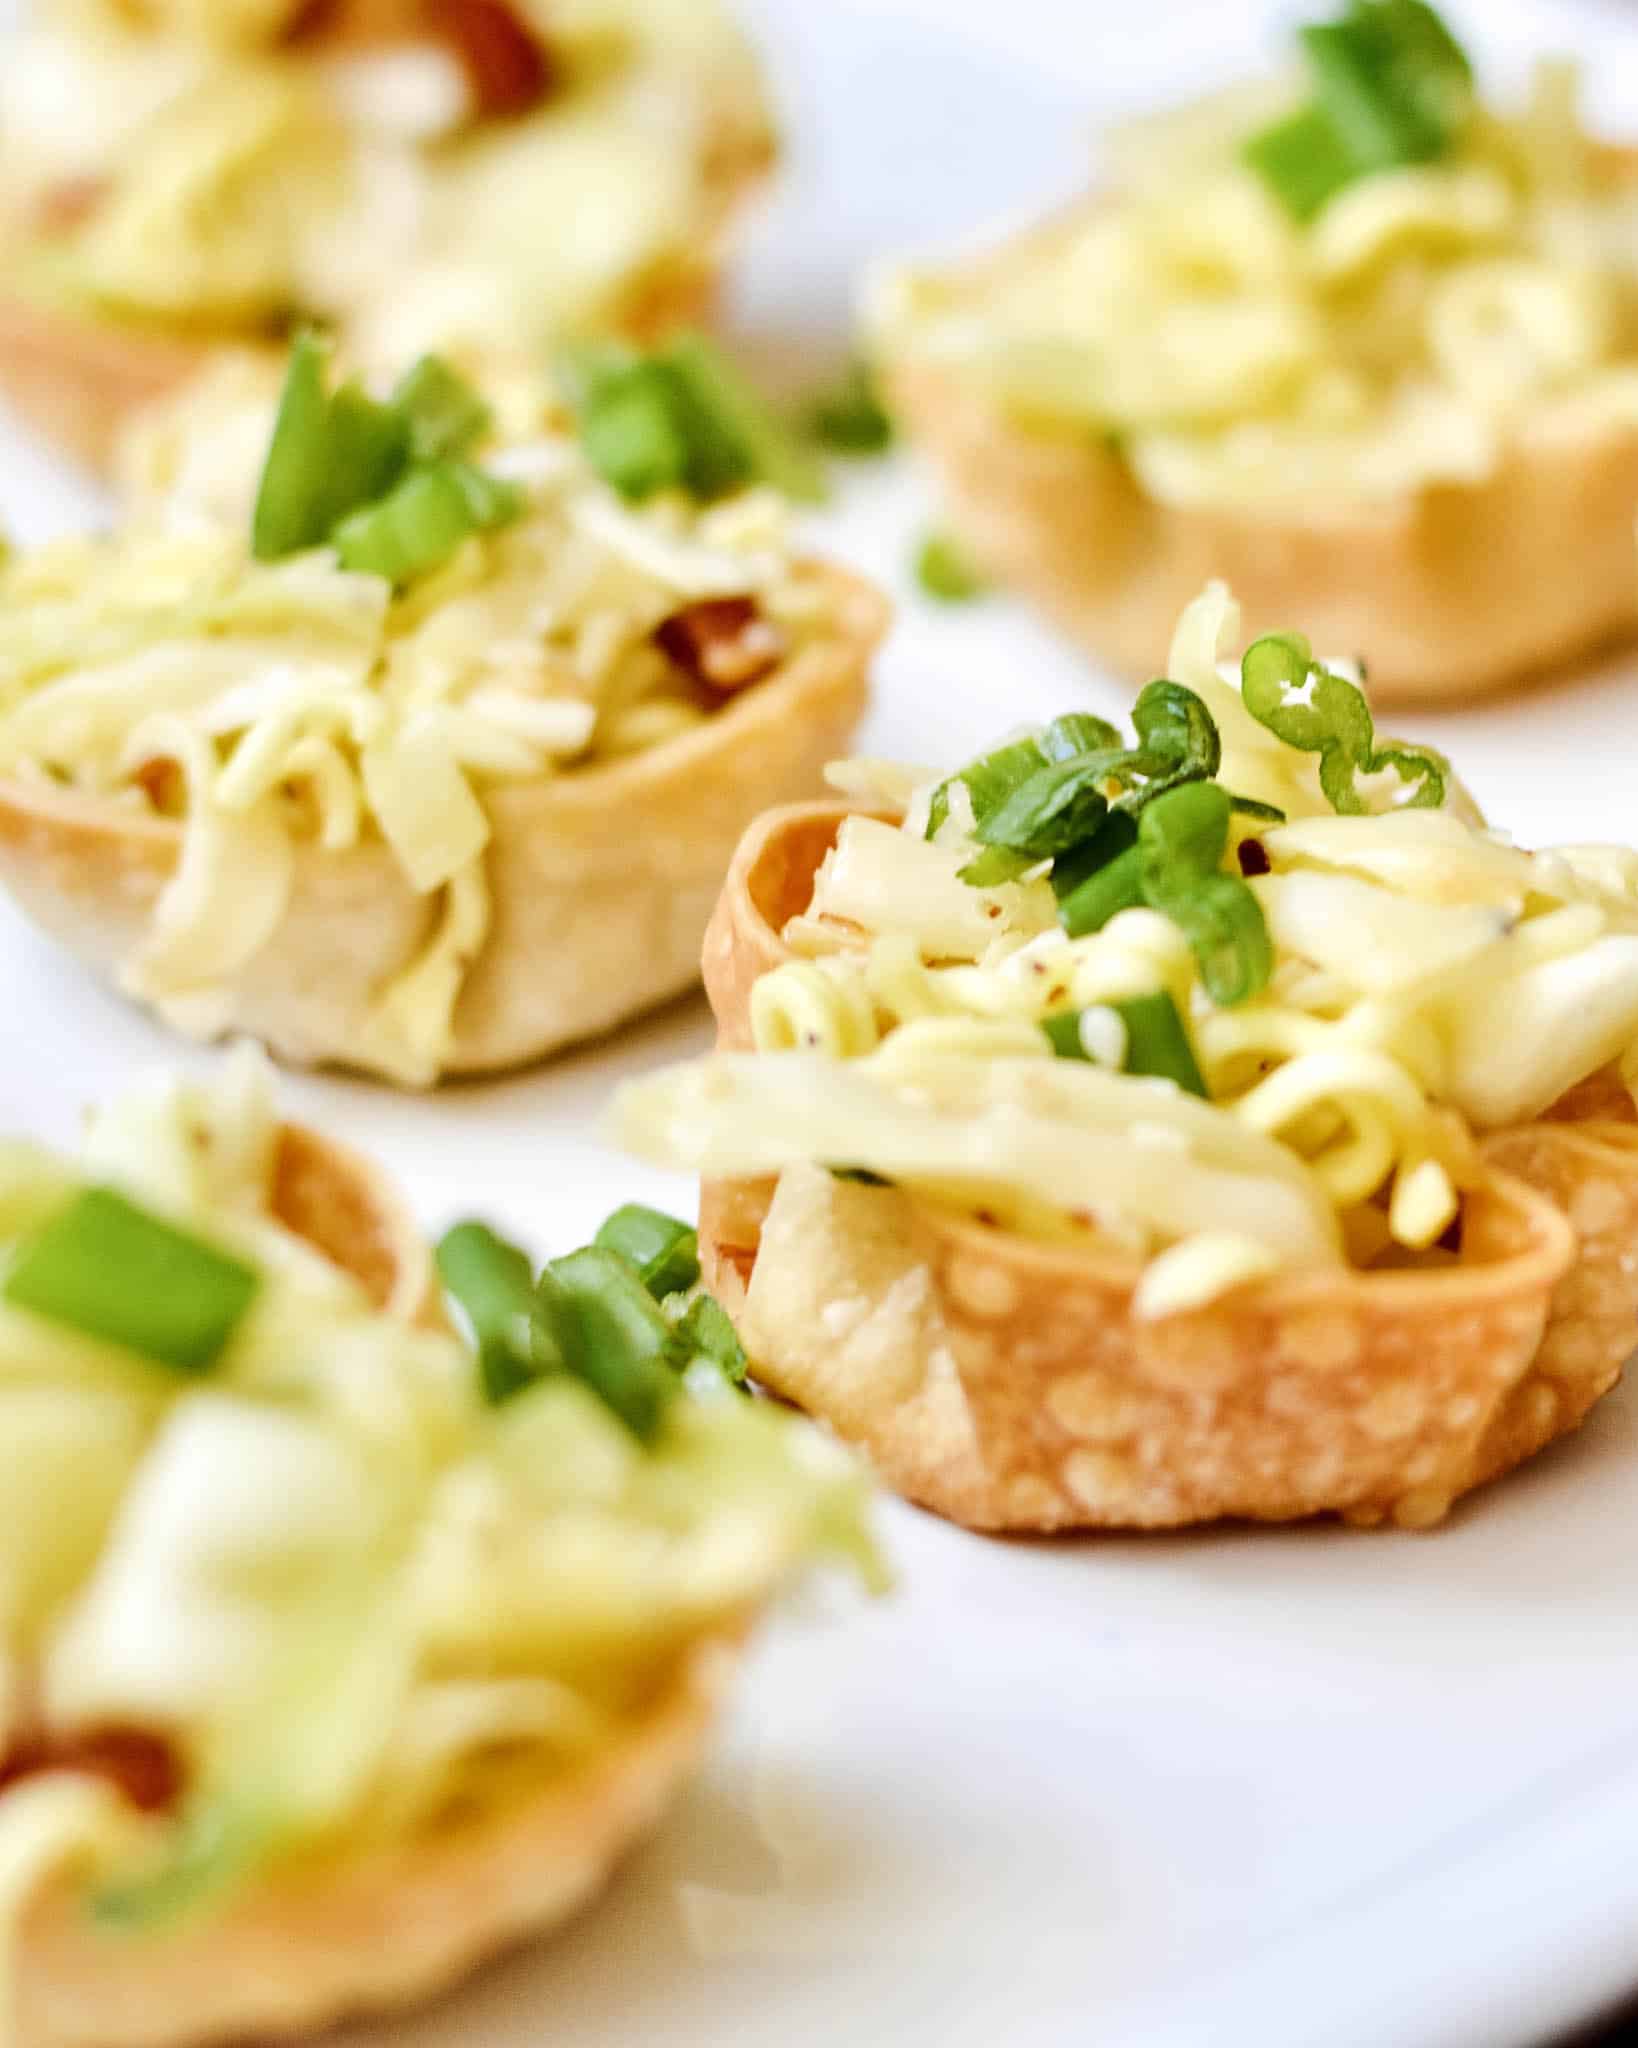 Asian Sumi Salad in Baked Wonton Cups | The Oven Light